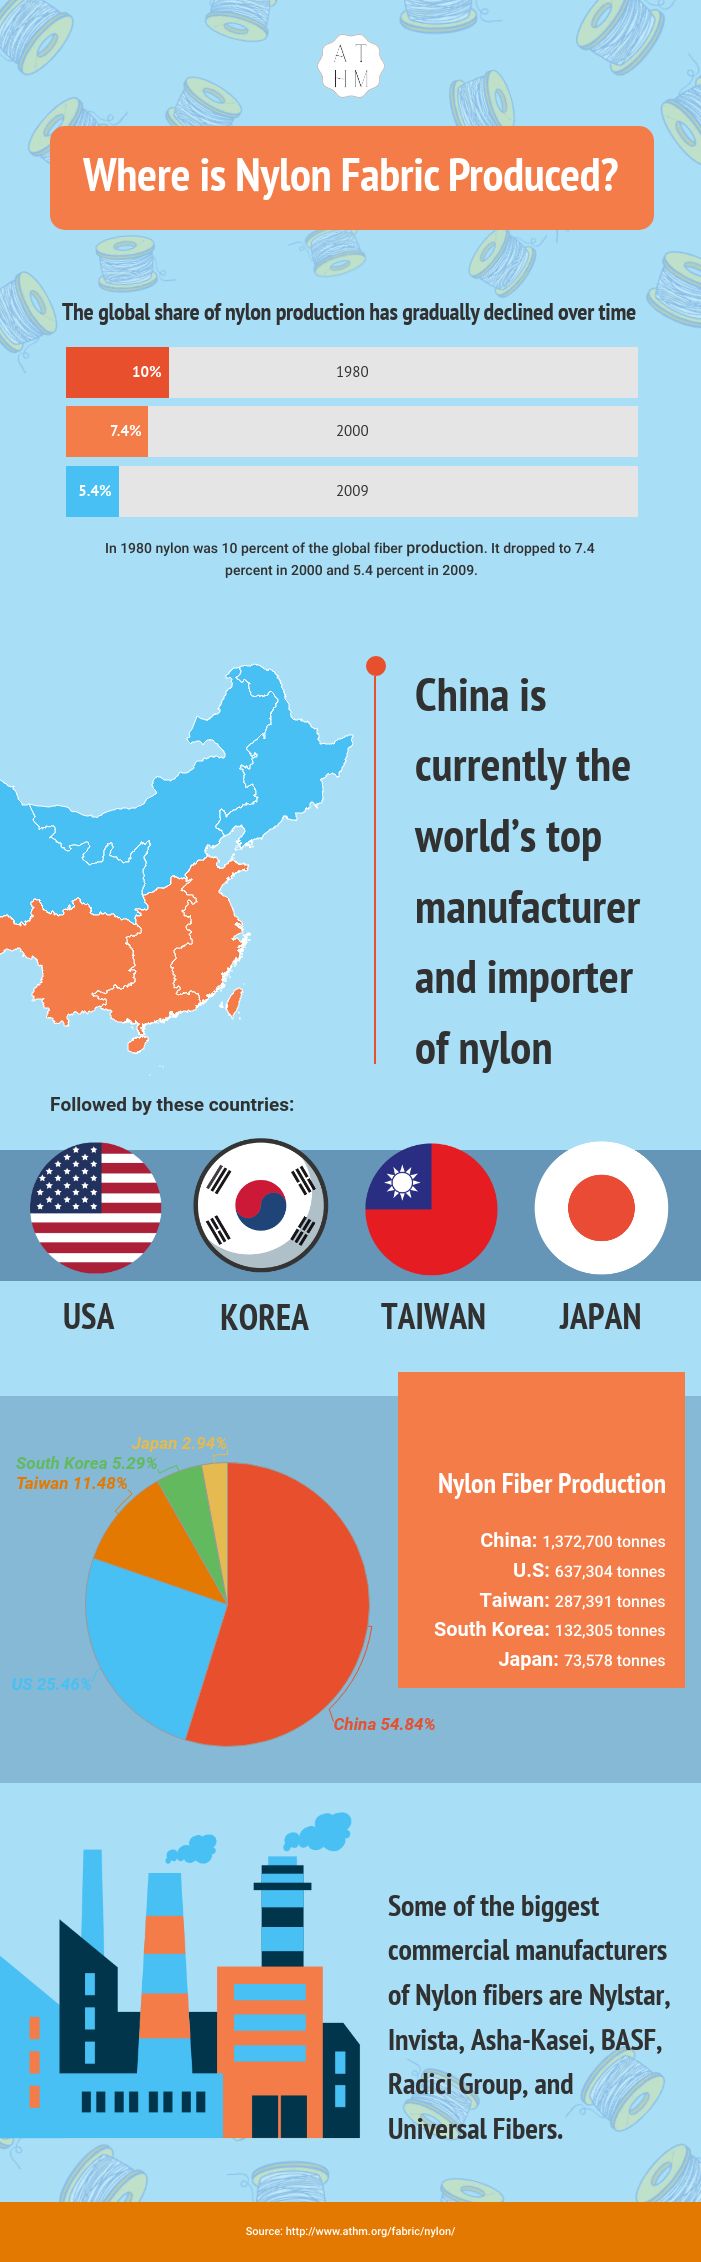 Where is Nylon Fabric Produced